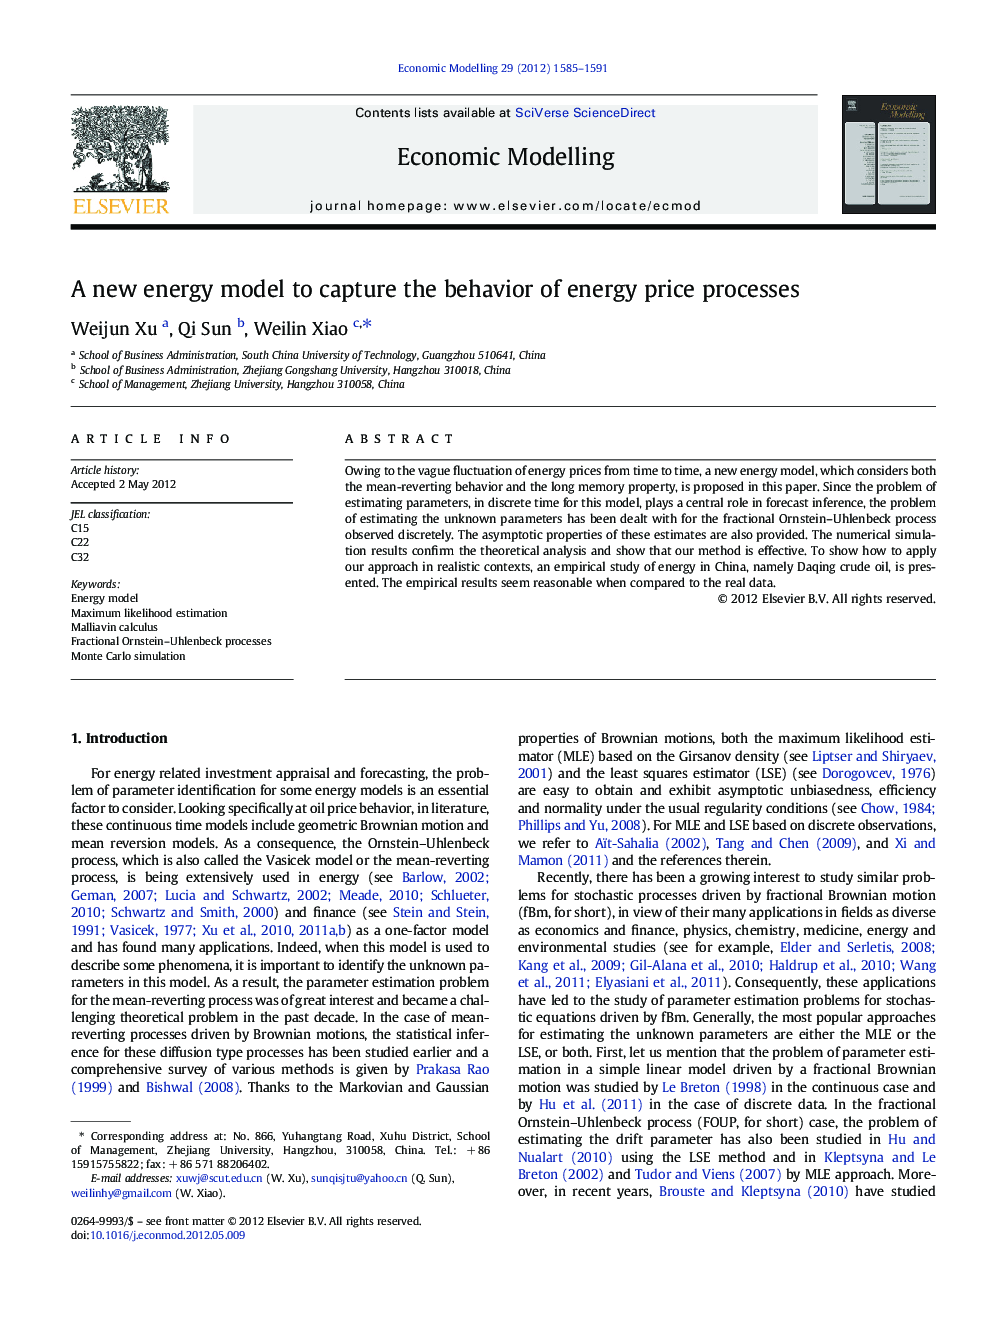 A new energy model to capture the behavior of energy price processes